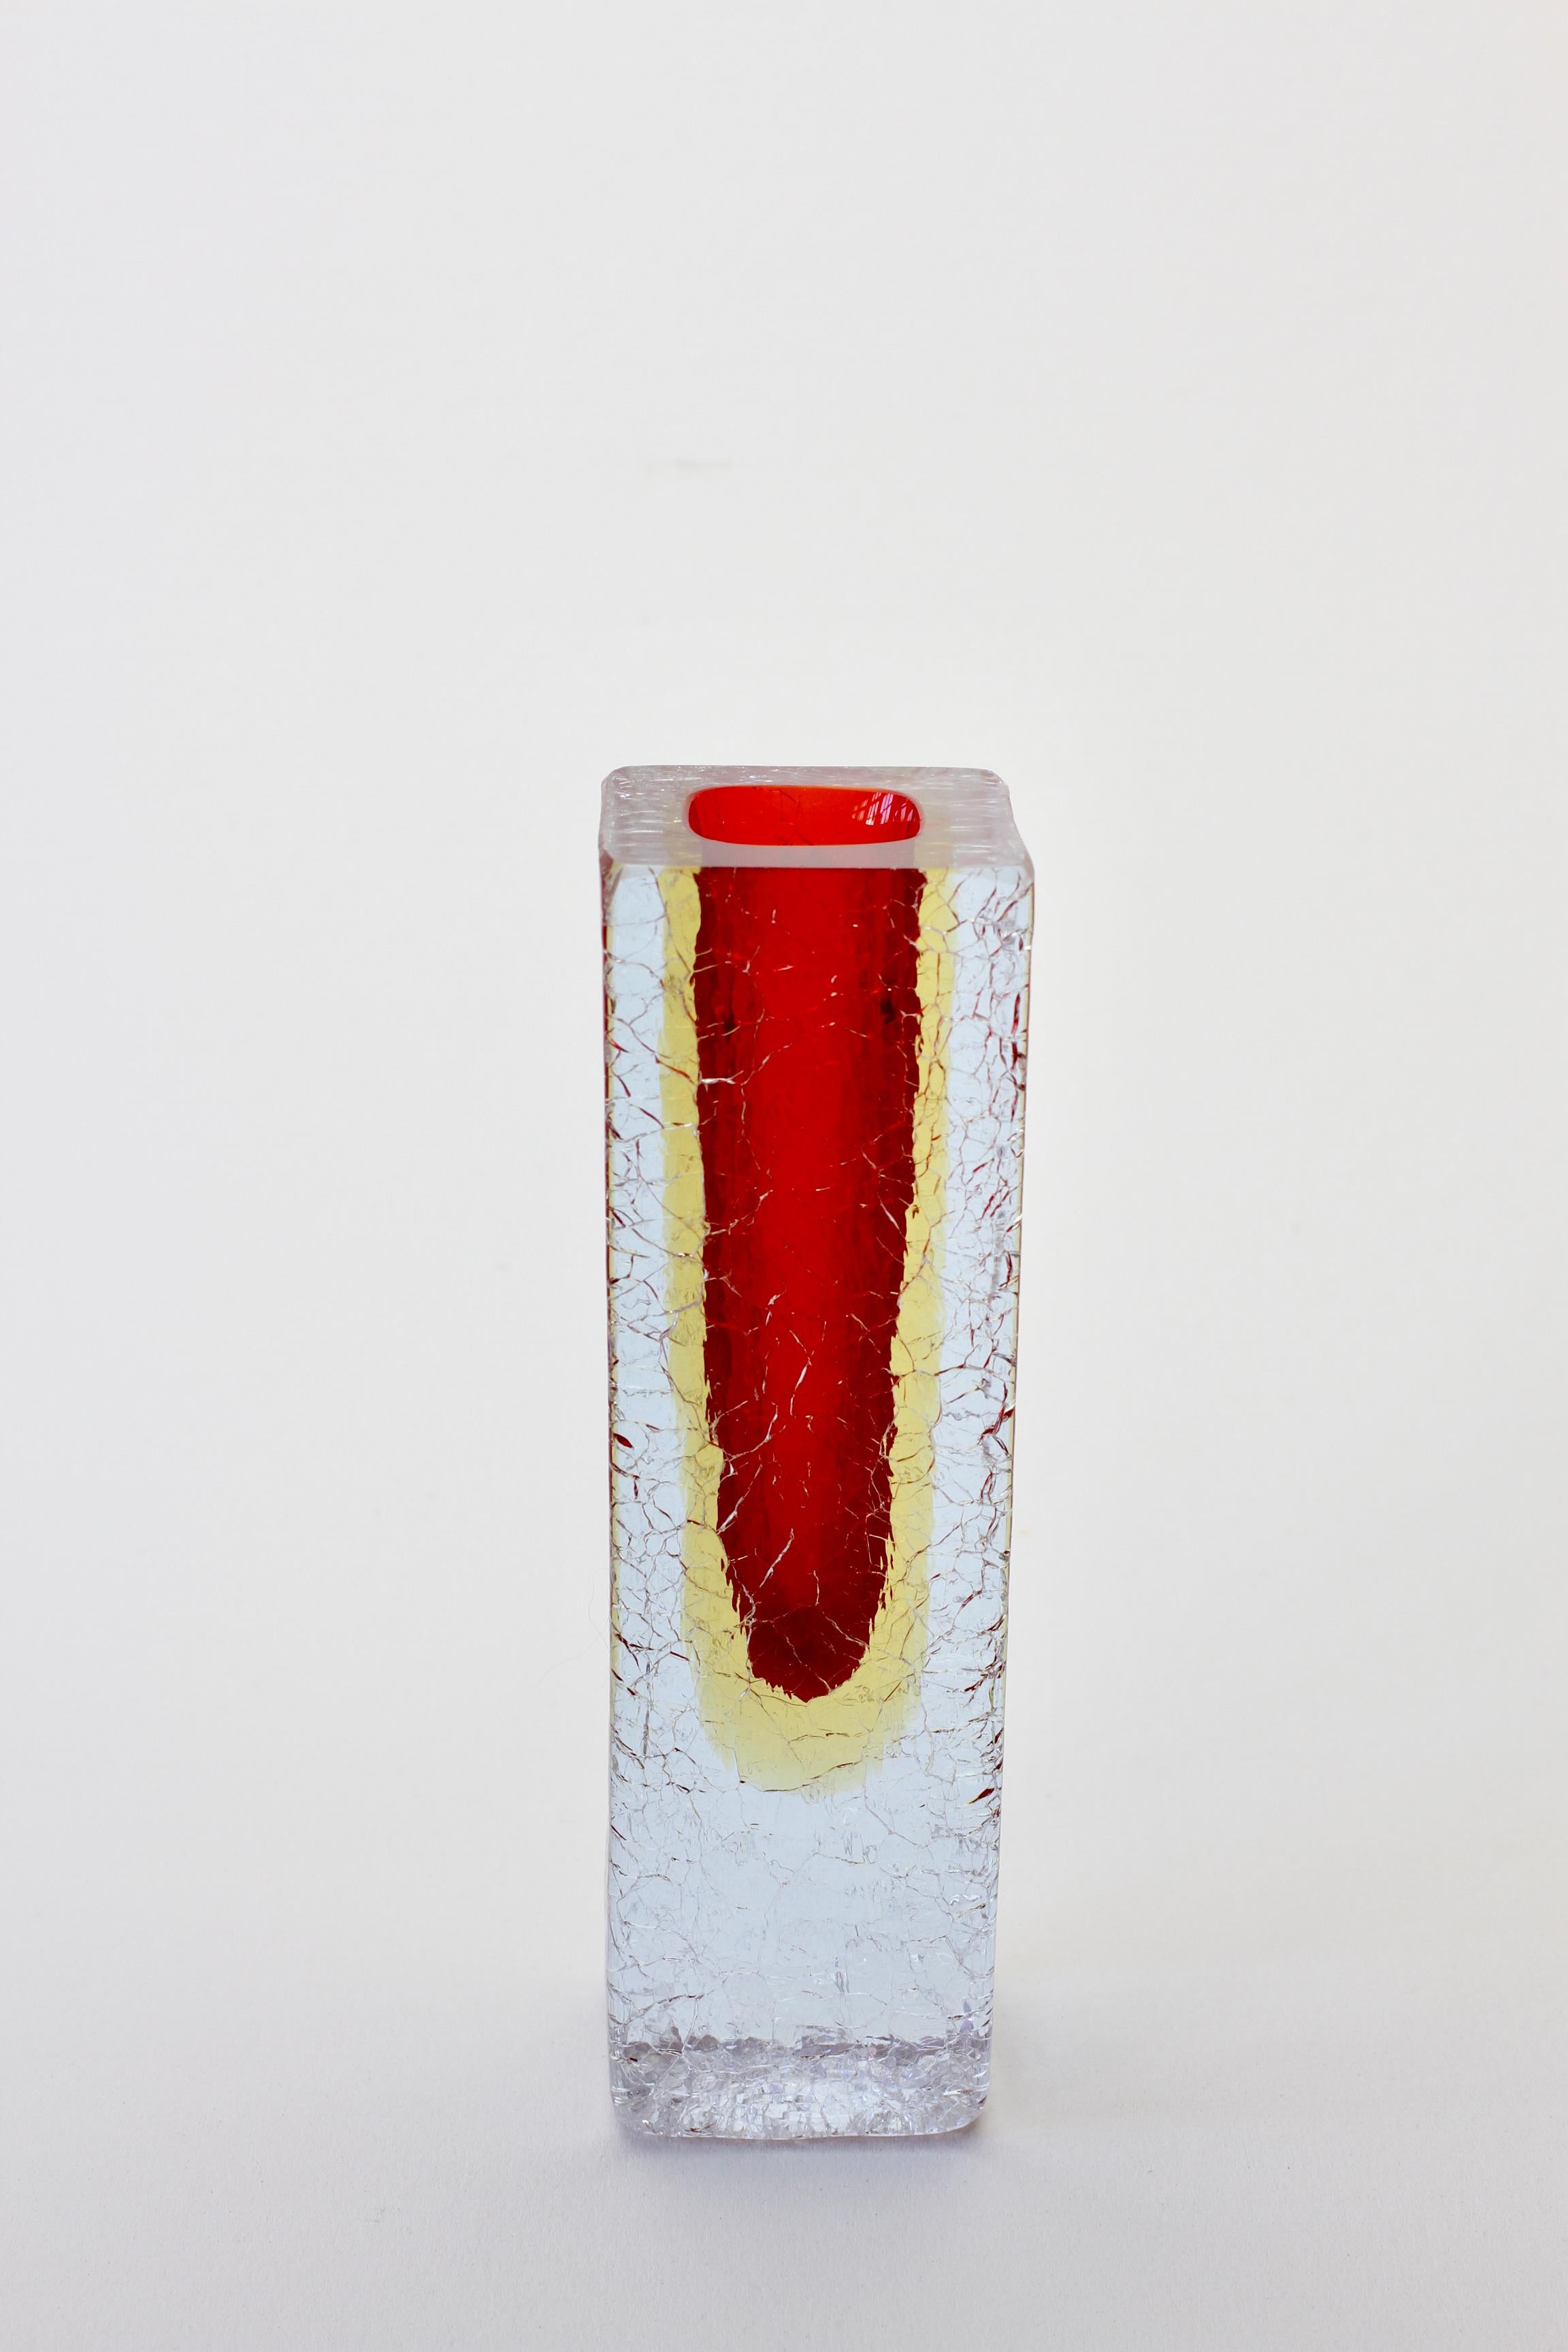 Faceted Red & Yellow Italian Murano 'Sommerso' Crackle Glass Vase, circa 1960s For Sale 5